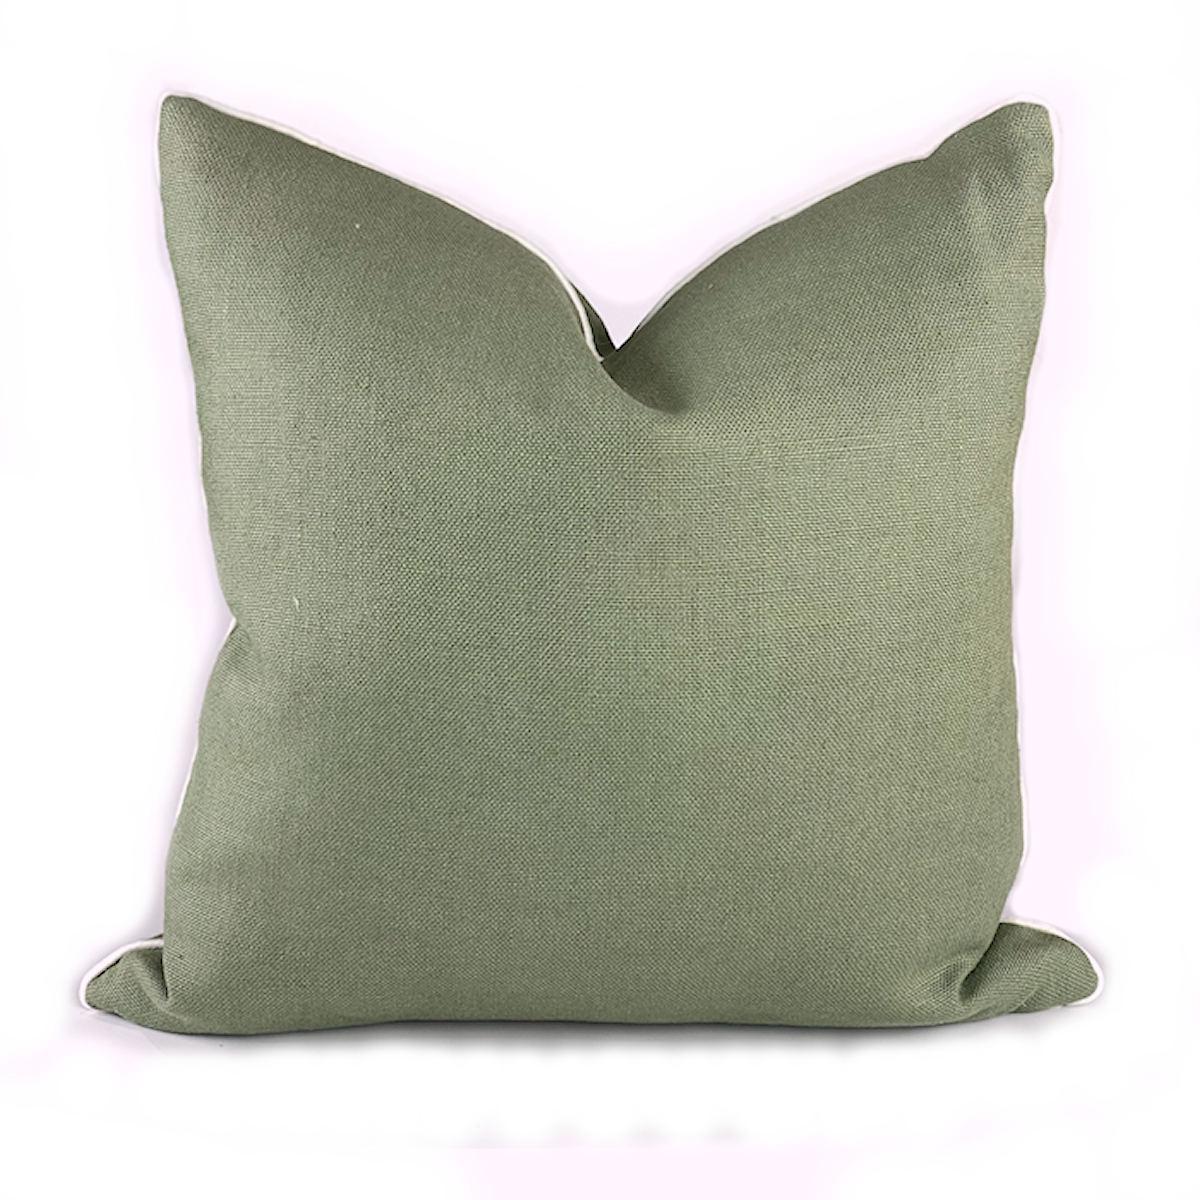 Australian artisan design and craftsmanship, this sage green linen pillow provides casual luxury for interiors fused with timeless elegance. 

Featuring high-end, European linen expressing the beauty of sustainable design bringing soft textural